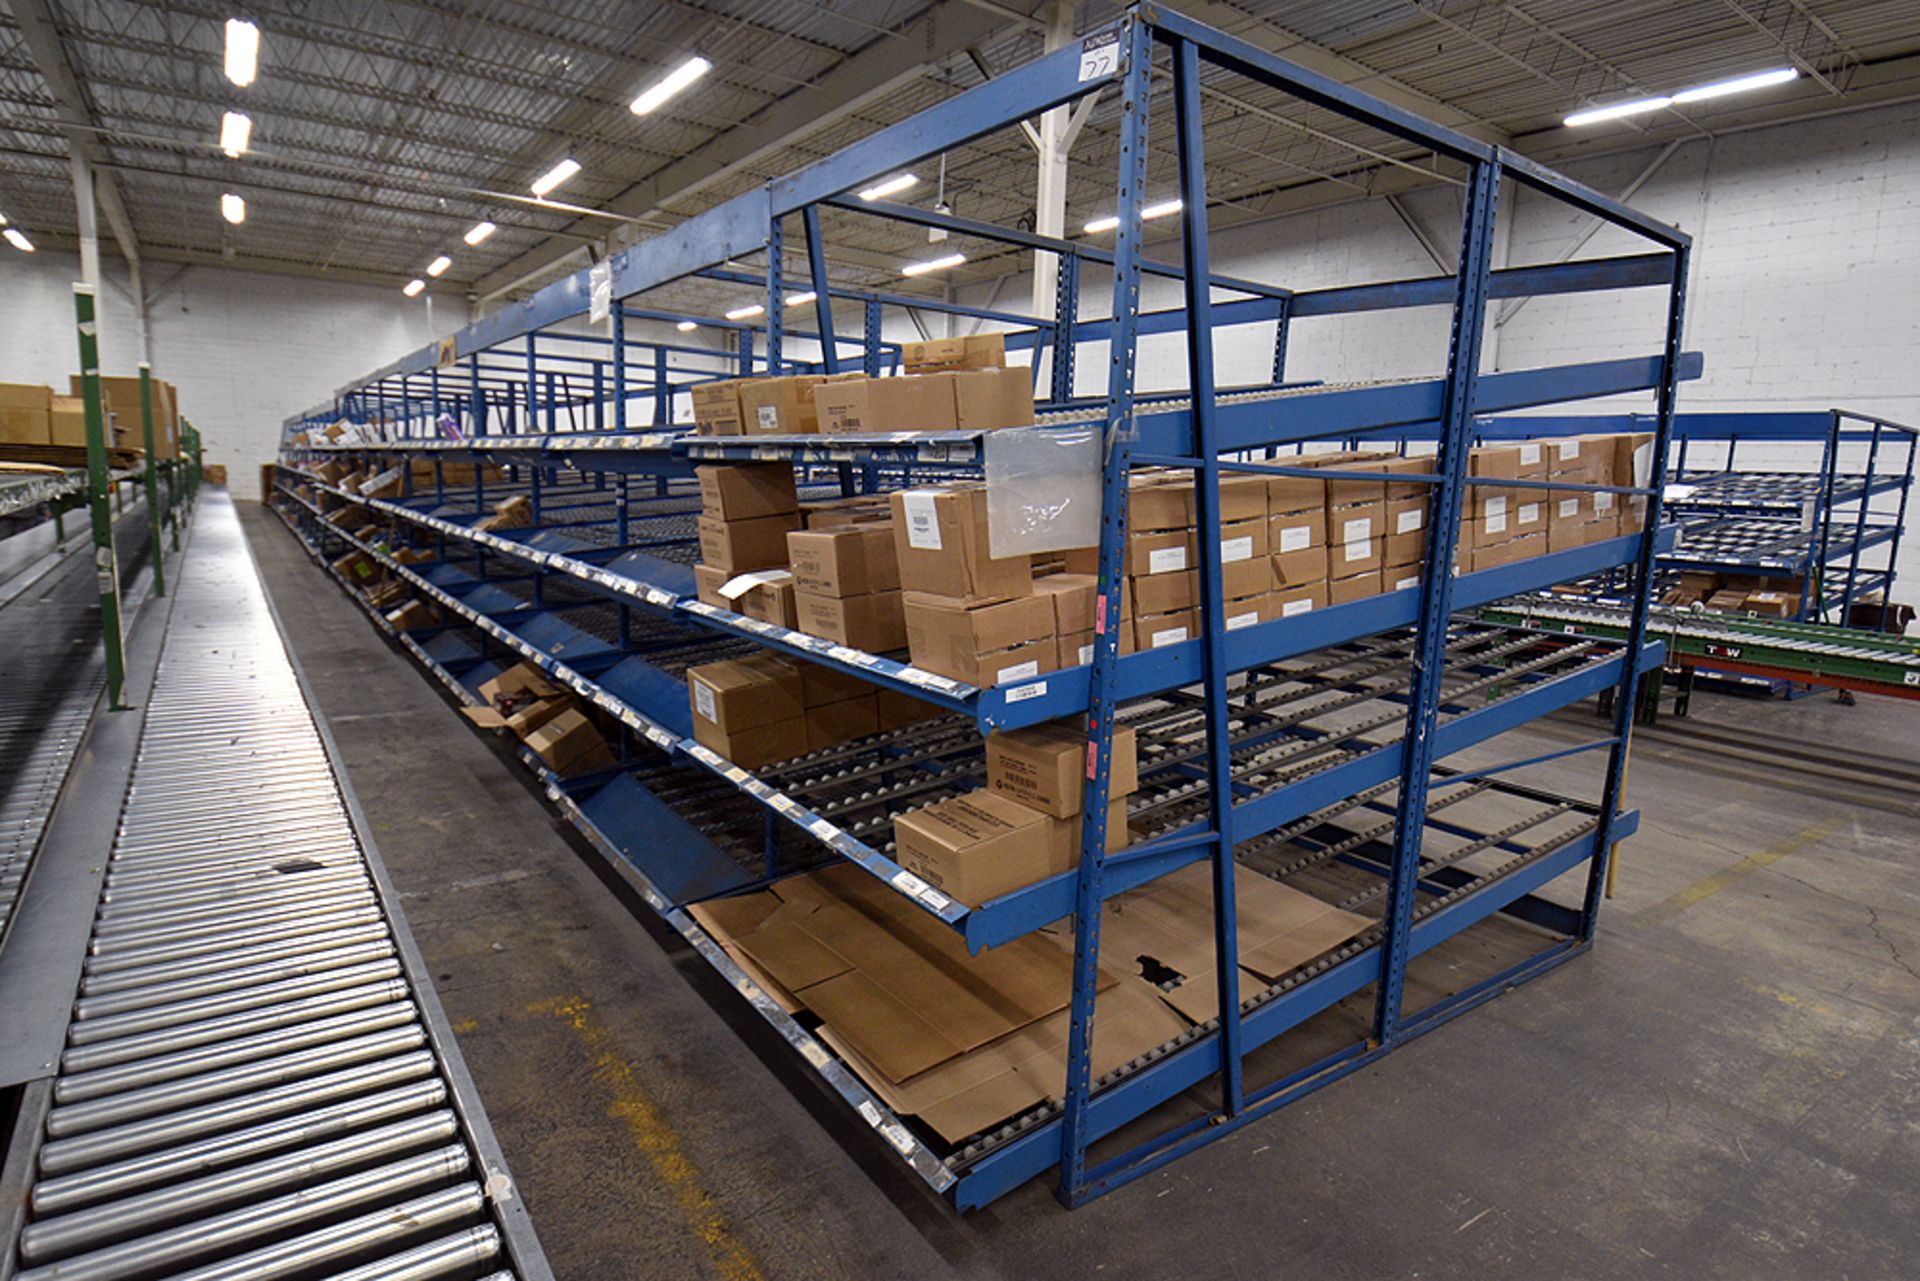 4-Tier Gravity Fed, Carton Flow Rack(132"x601.5"x95"H) (108"x1" Rollers) - Image 3 of 3